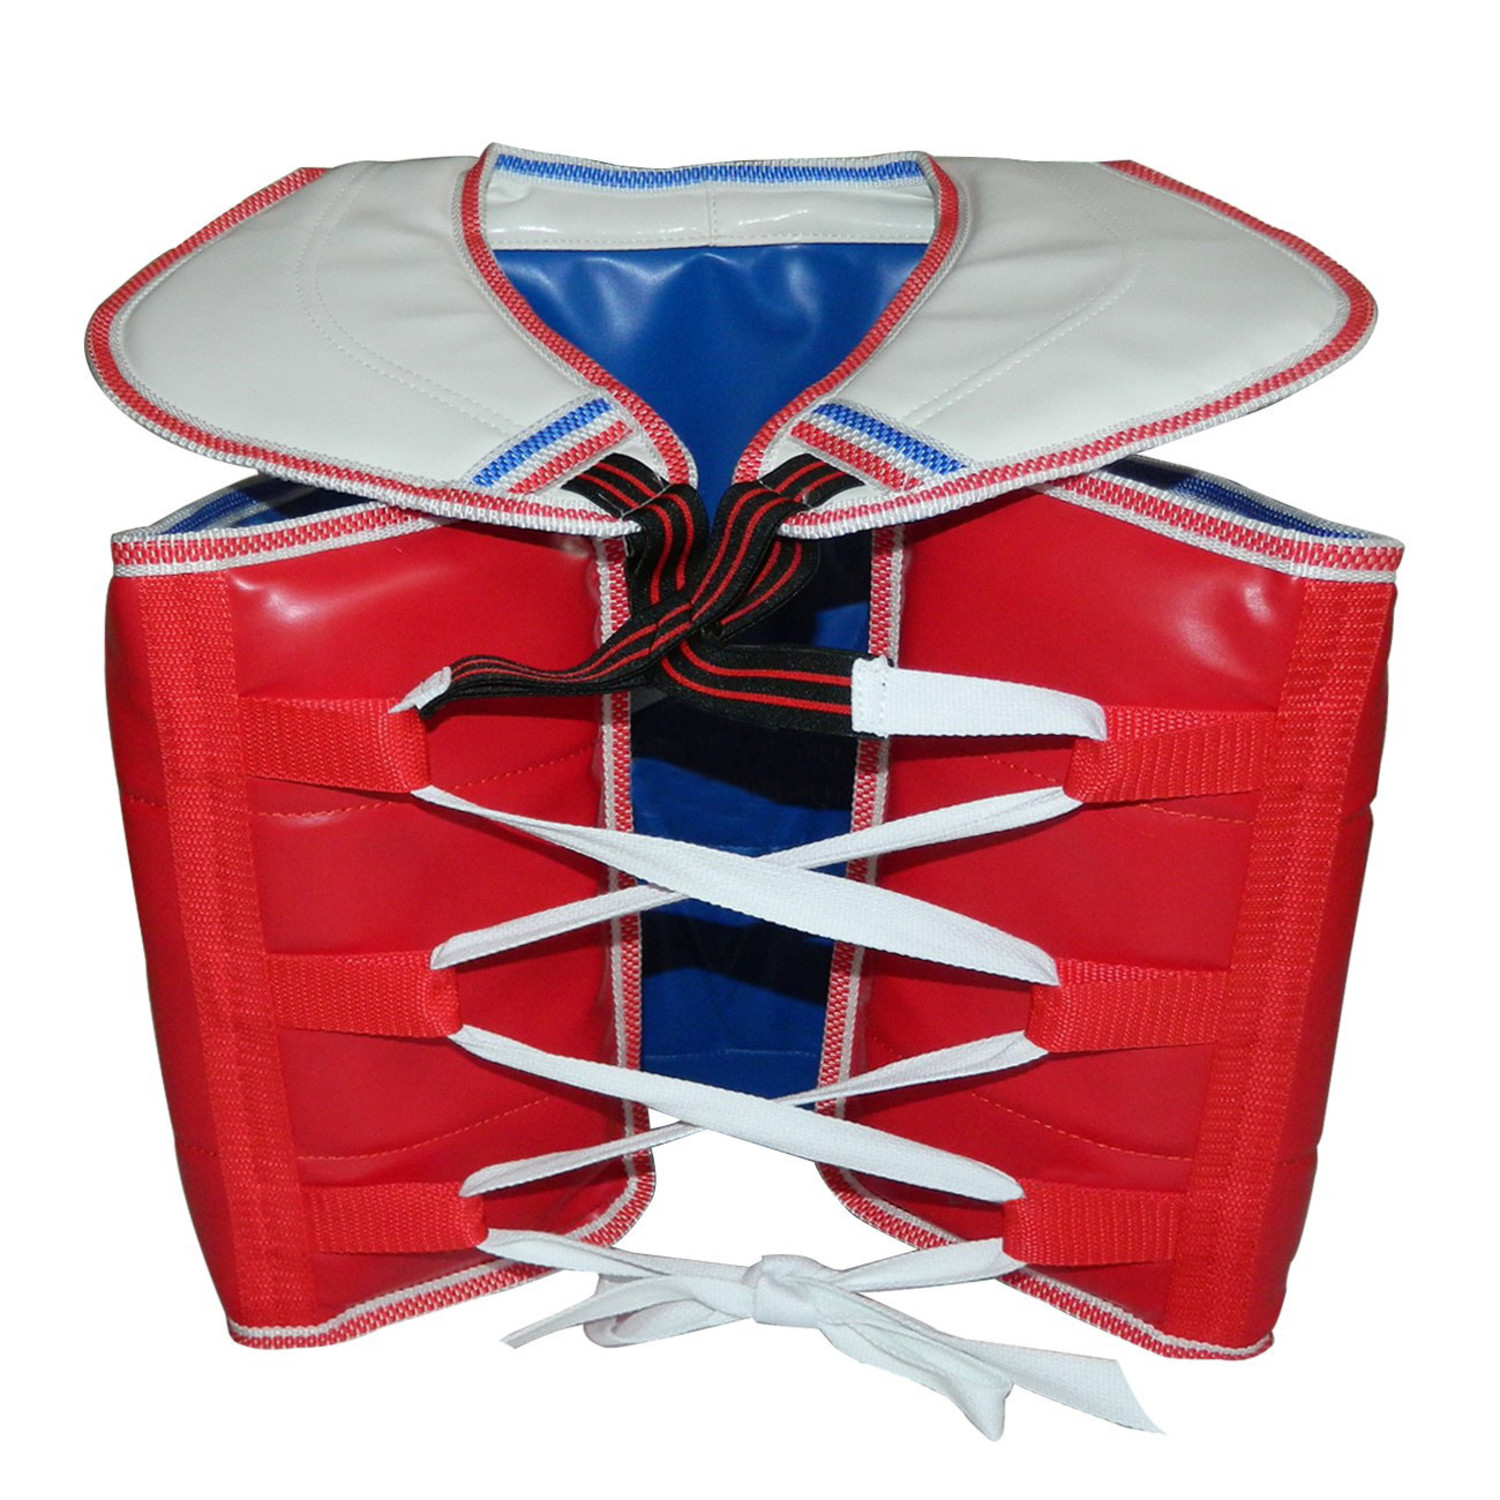 WT Taekwondo Chest Protector for WT Competition Sparring - Enso